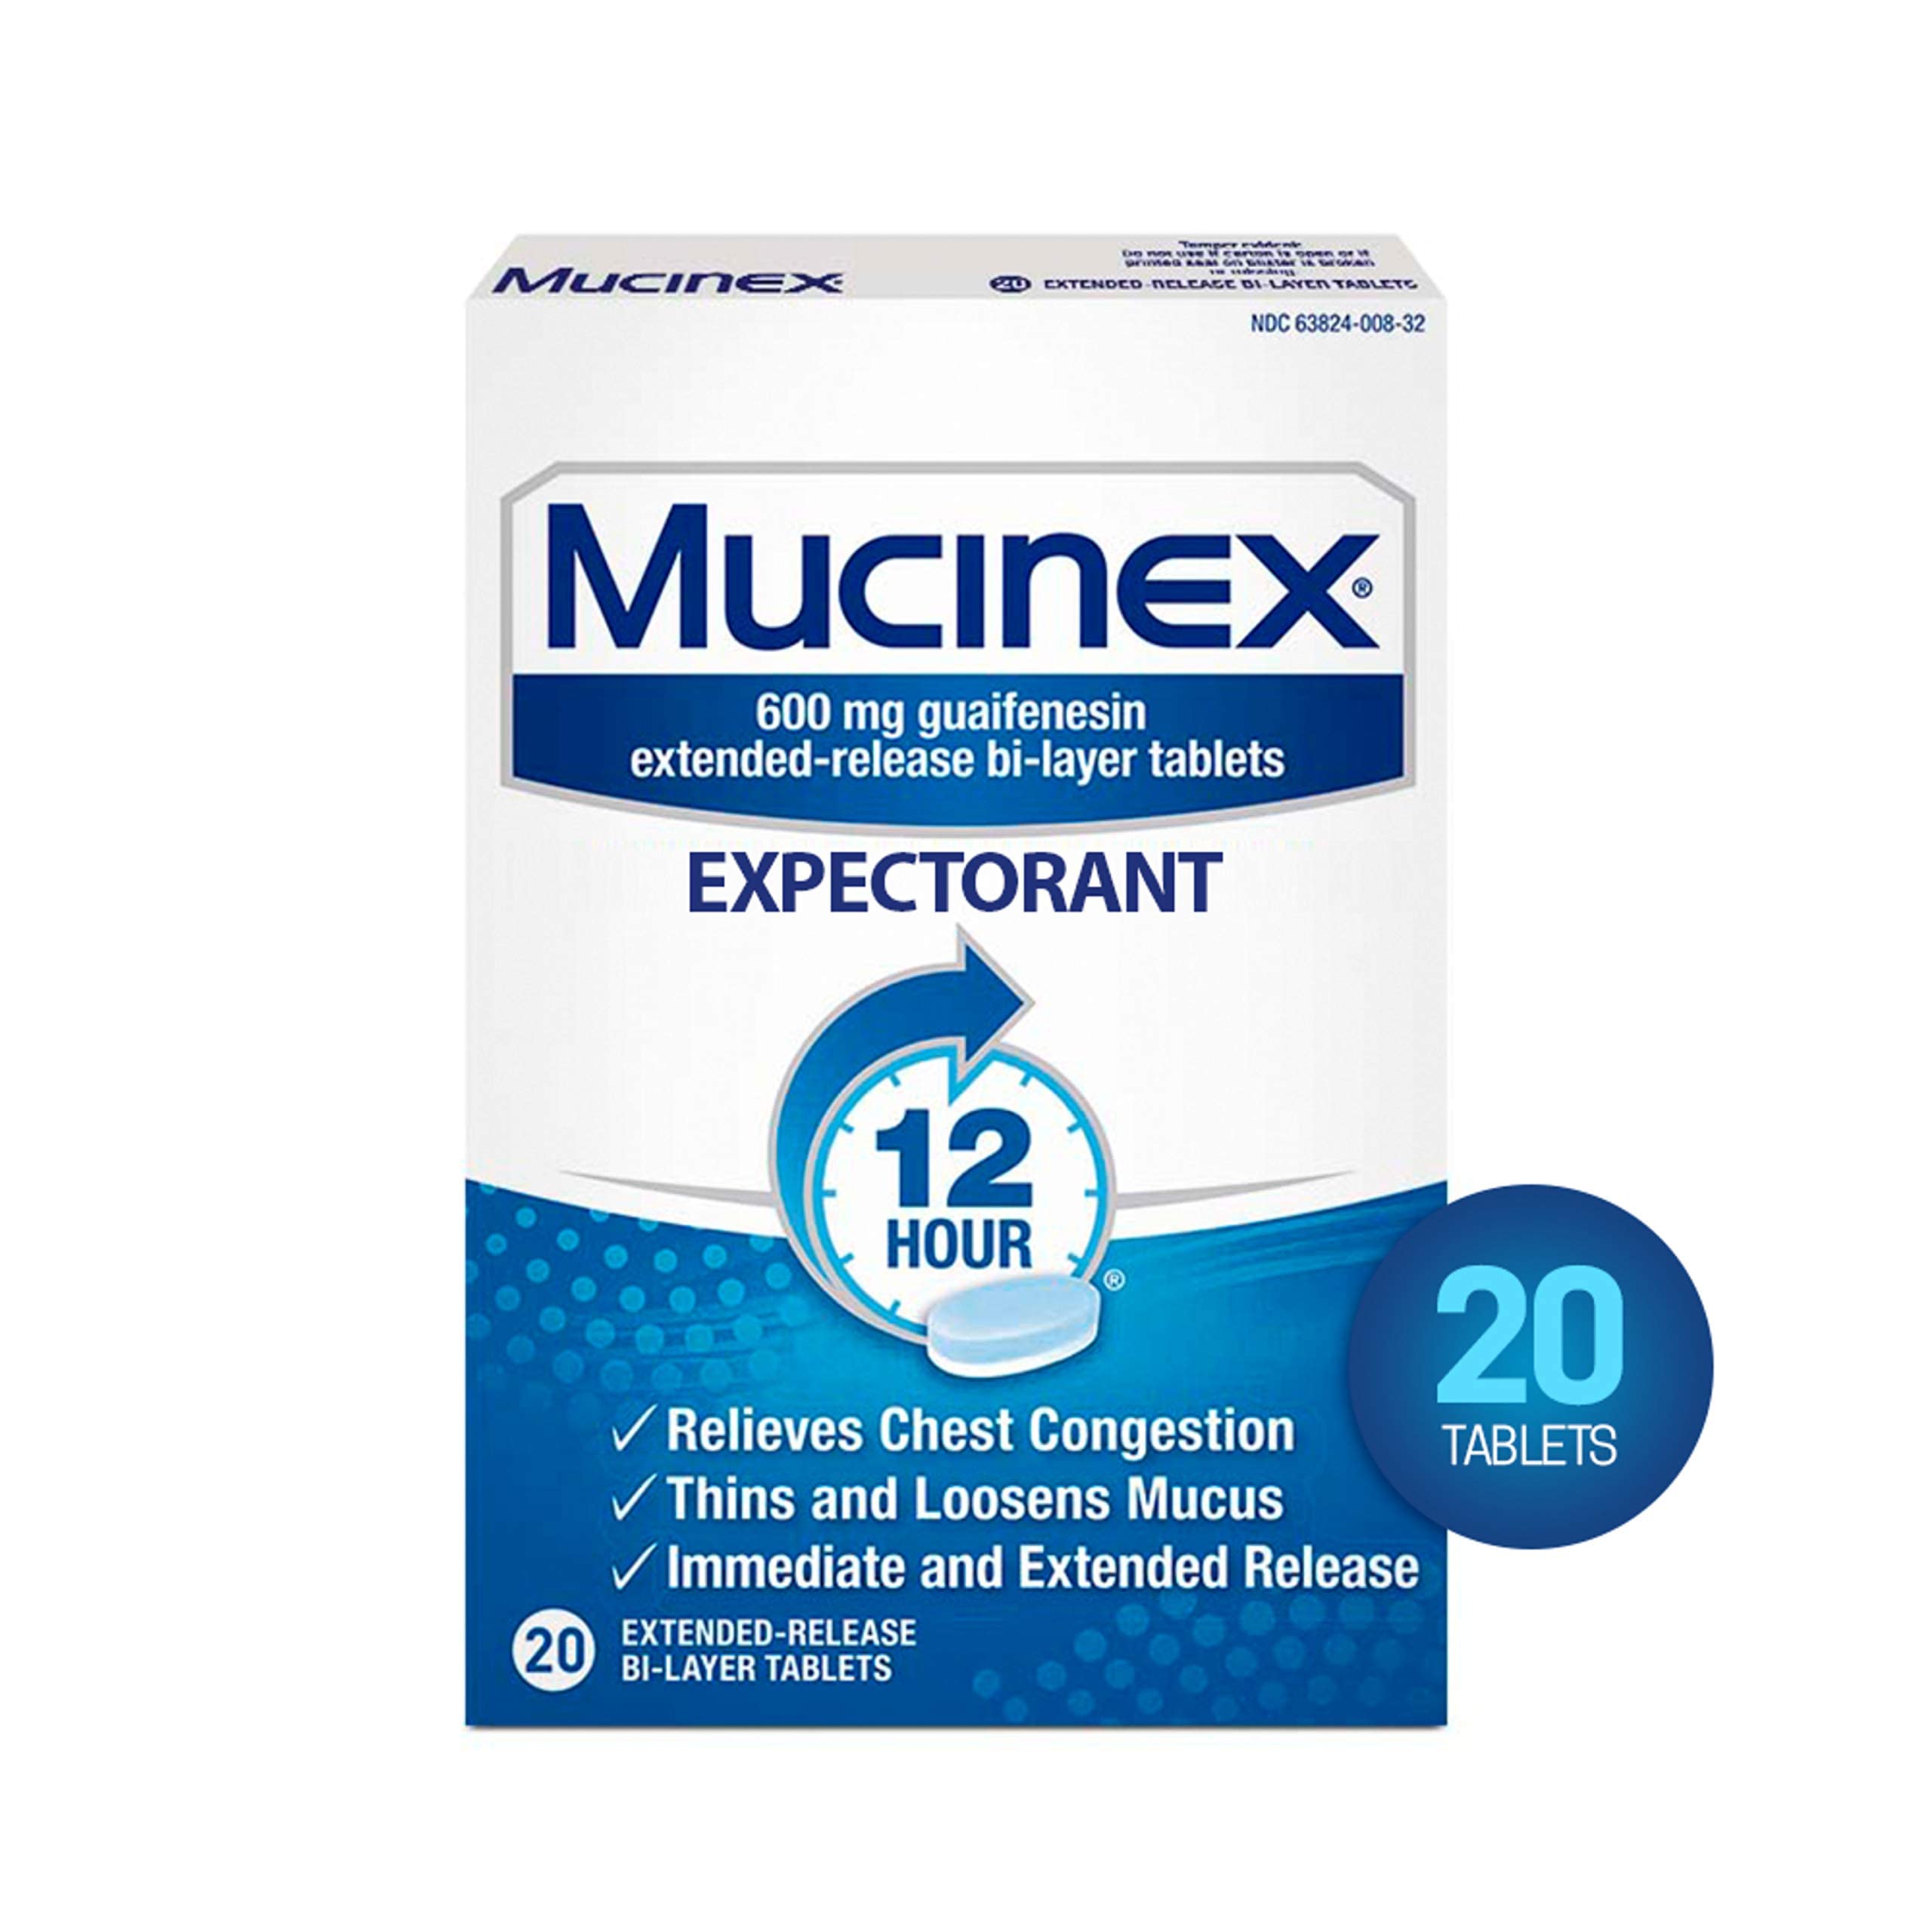 Chest Congestion, Mucinex Expectorant 12 Hour Extended Release Tablets, 20ct, 600mg Guaifenesin with Extended Relief of Chest Congestion Caused by Excess Mucus. Thins and Loosens Mucus